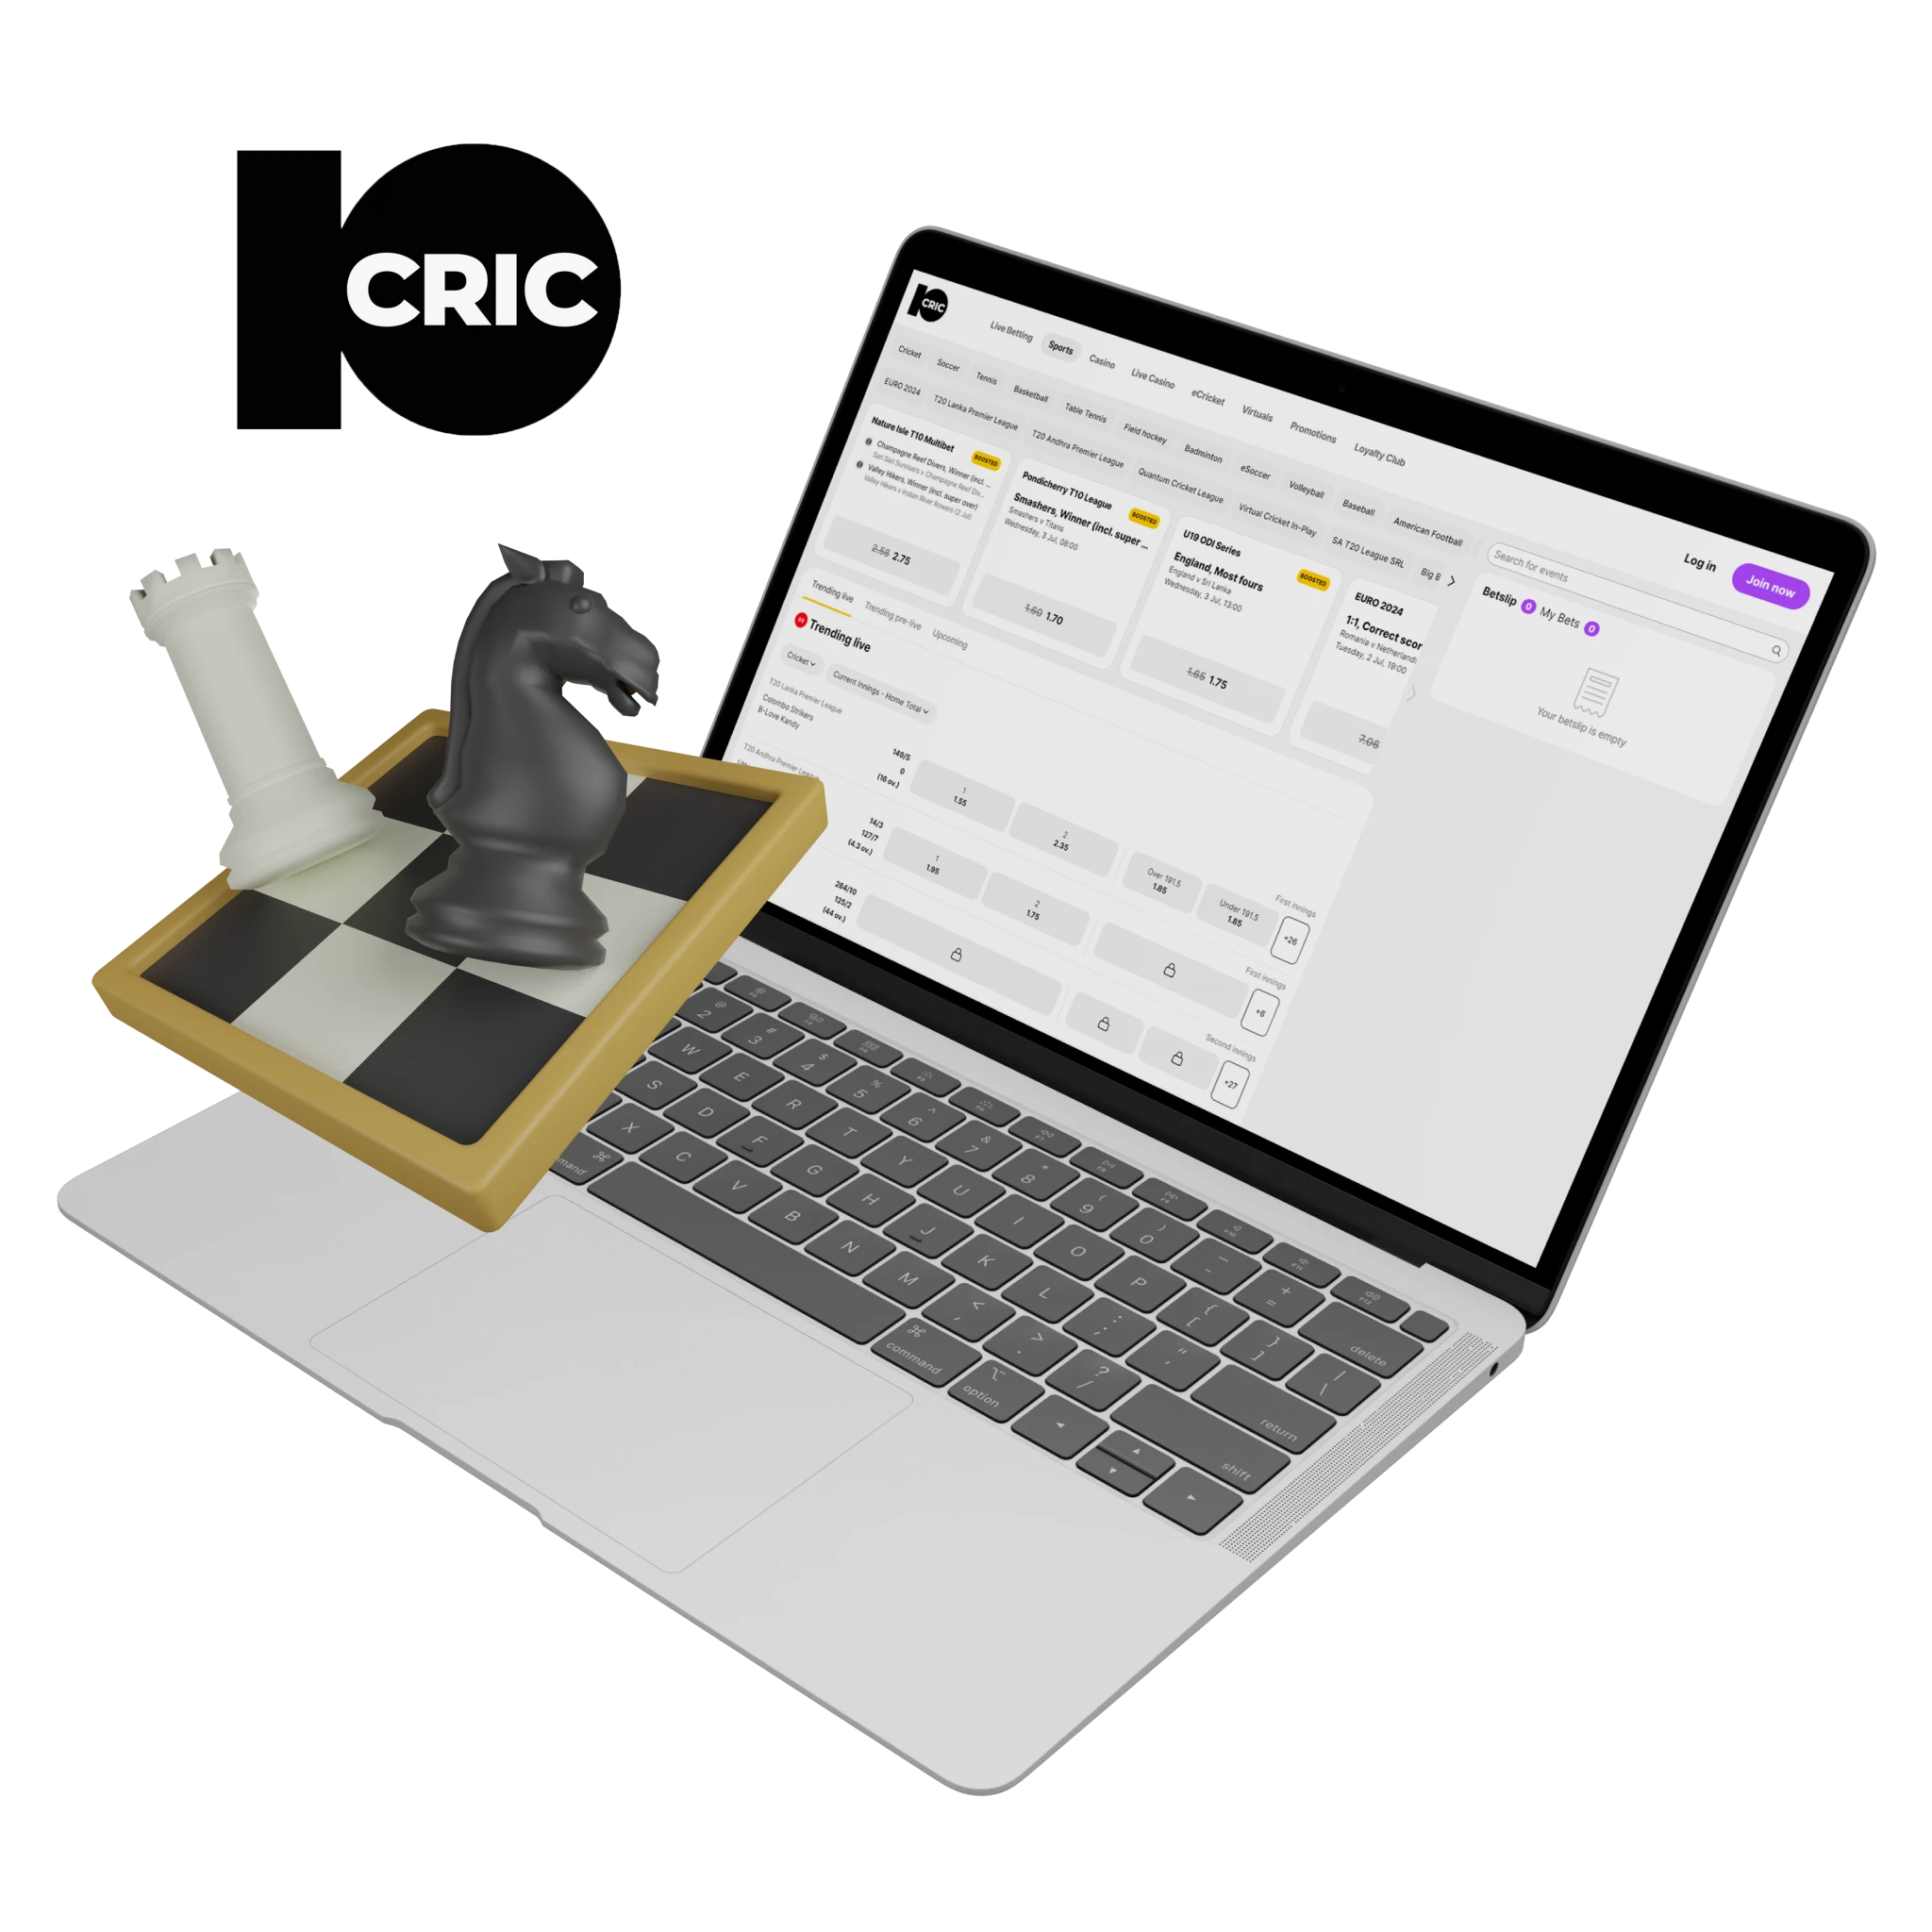 10cric provides a comprehensive chess betting experience, ensuring high quality service and catering to the needs of all categories of players.